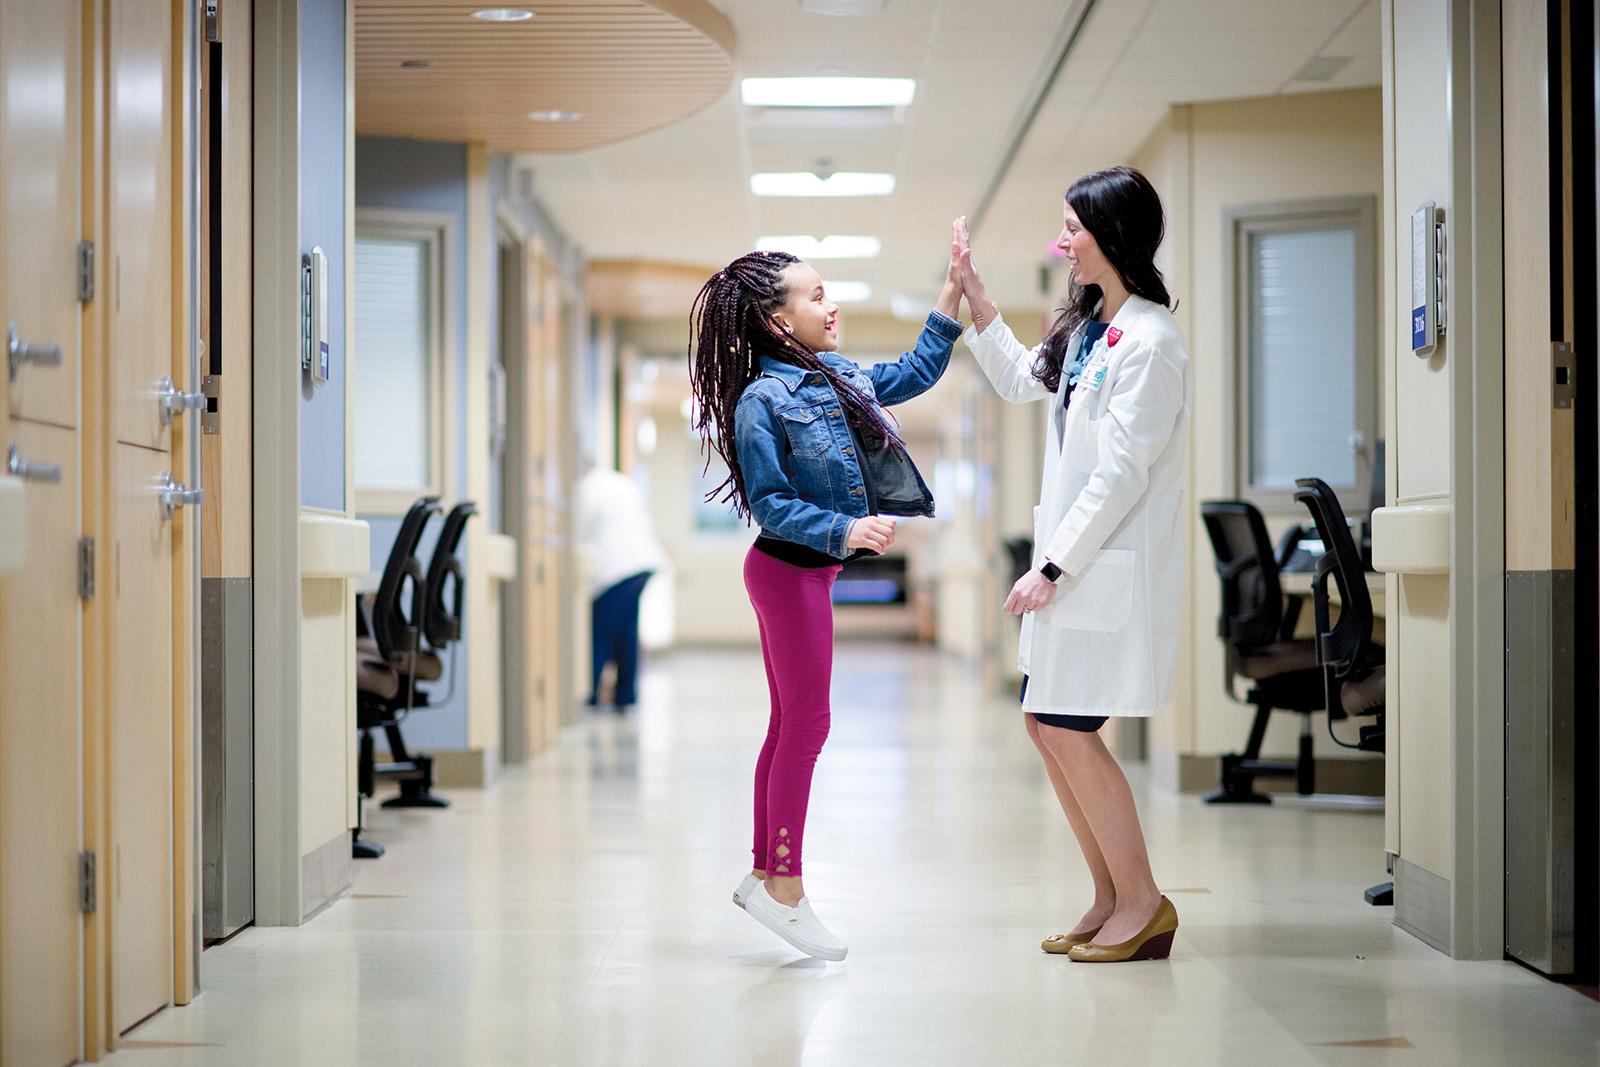 Emplify Health provider Stephanie Neuman, MD, high fiving young girl in clinic hallway.